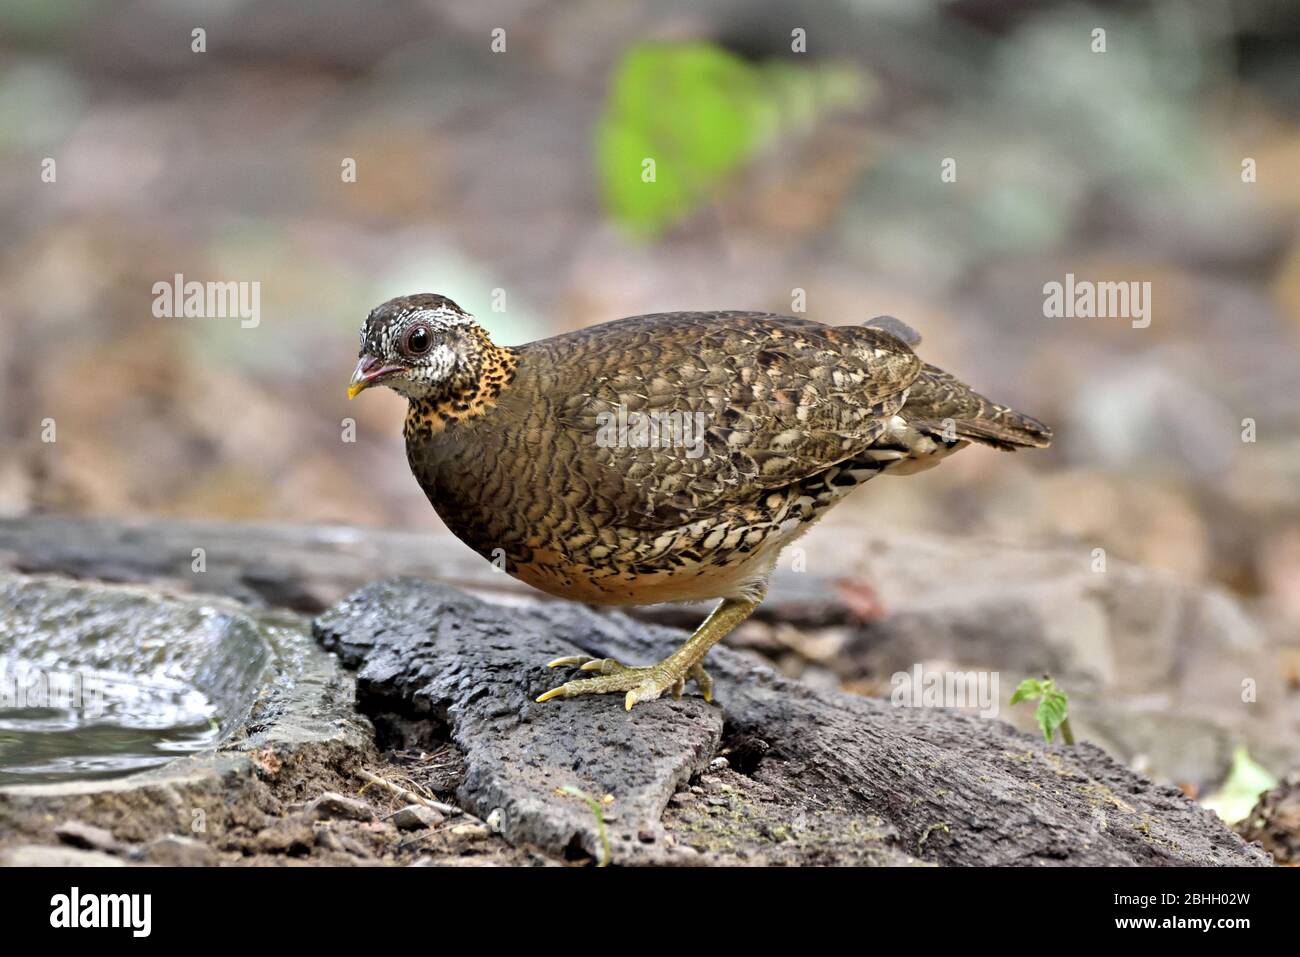 A Green-legged Partridge (Arbrophila chloropus), formally known as Scaly-breasted Partridge, comimg to drink at a forest pool in Western Thailand Stock Photo